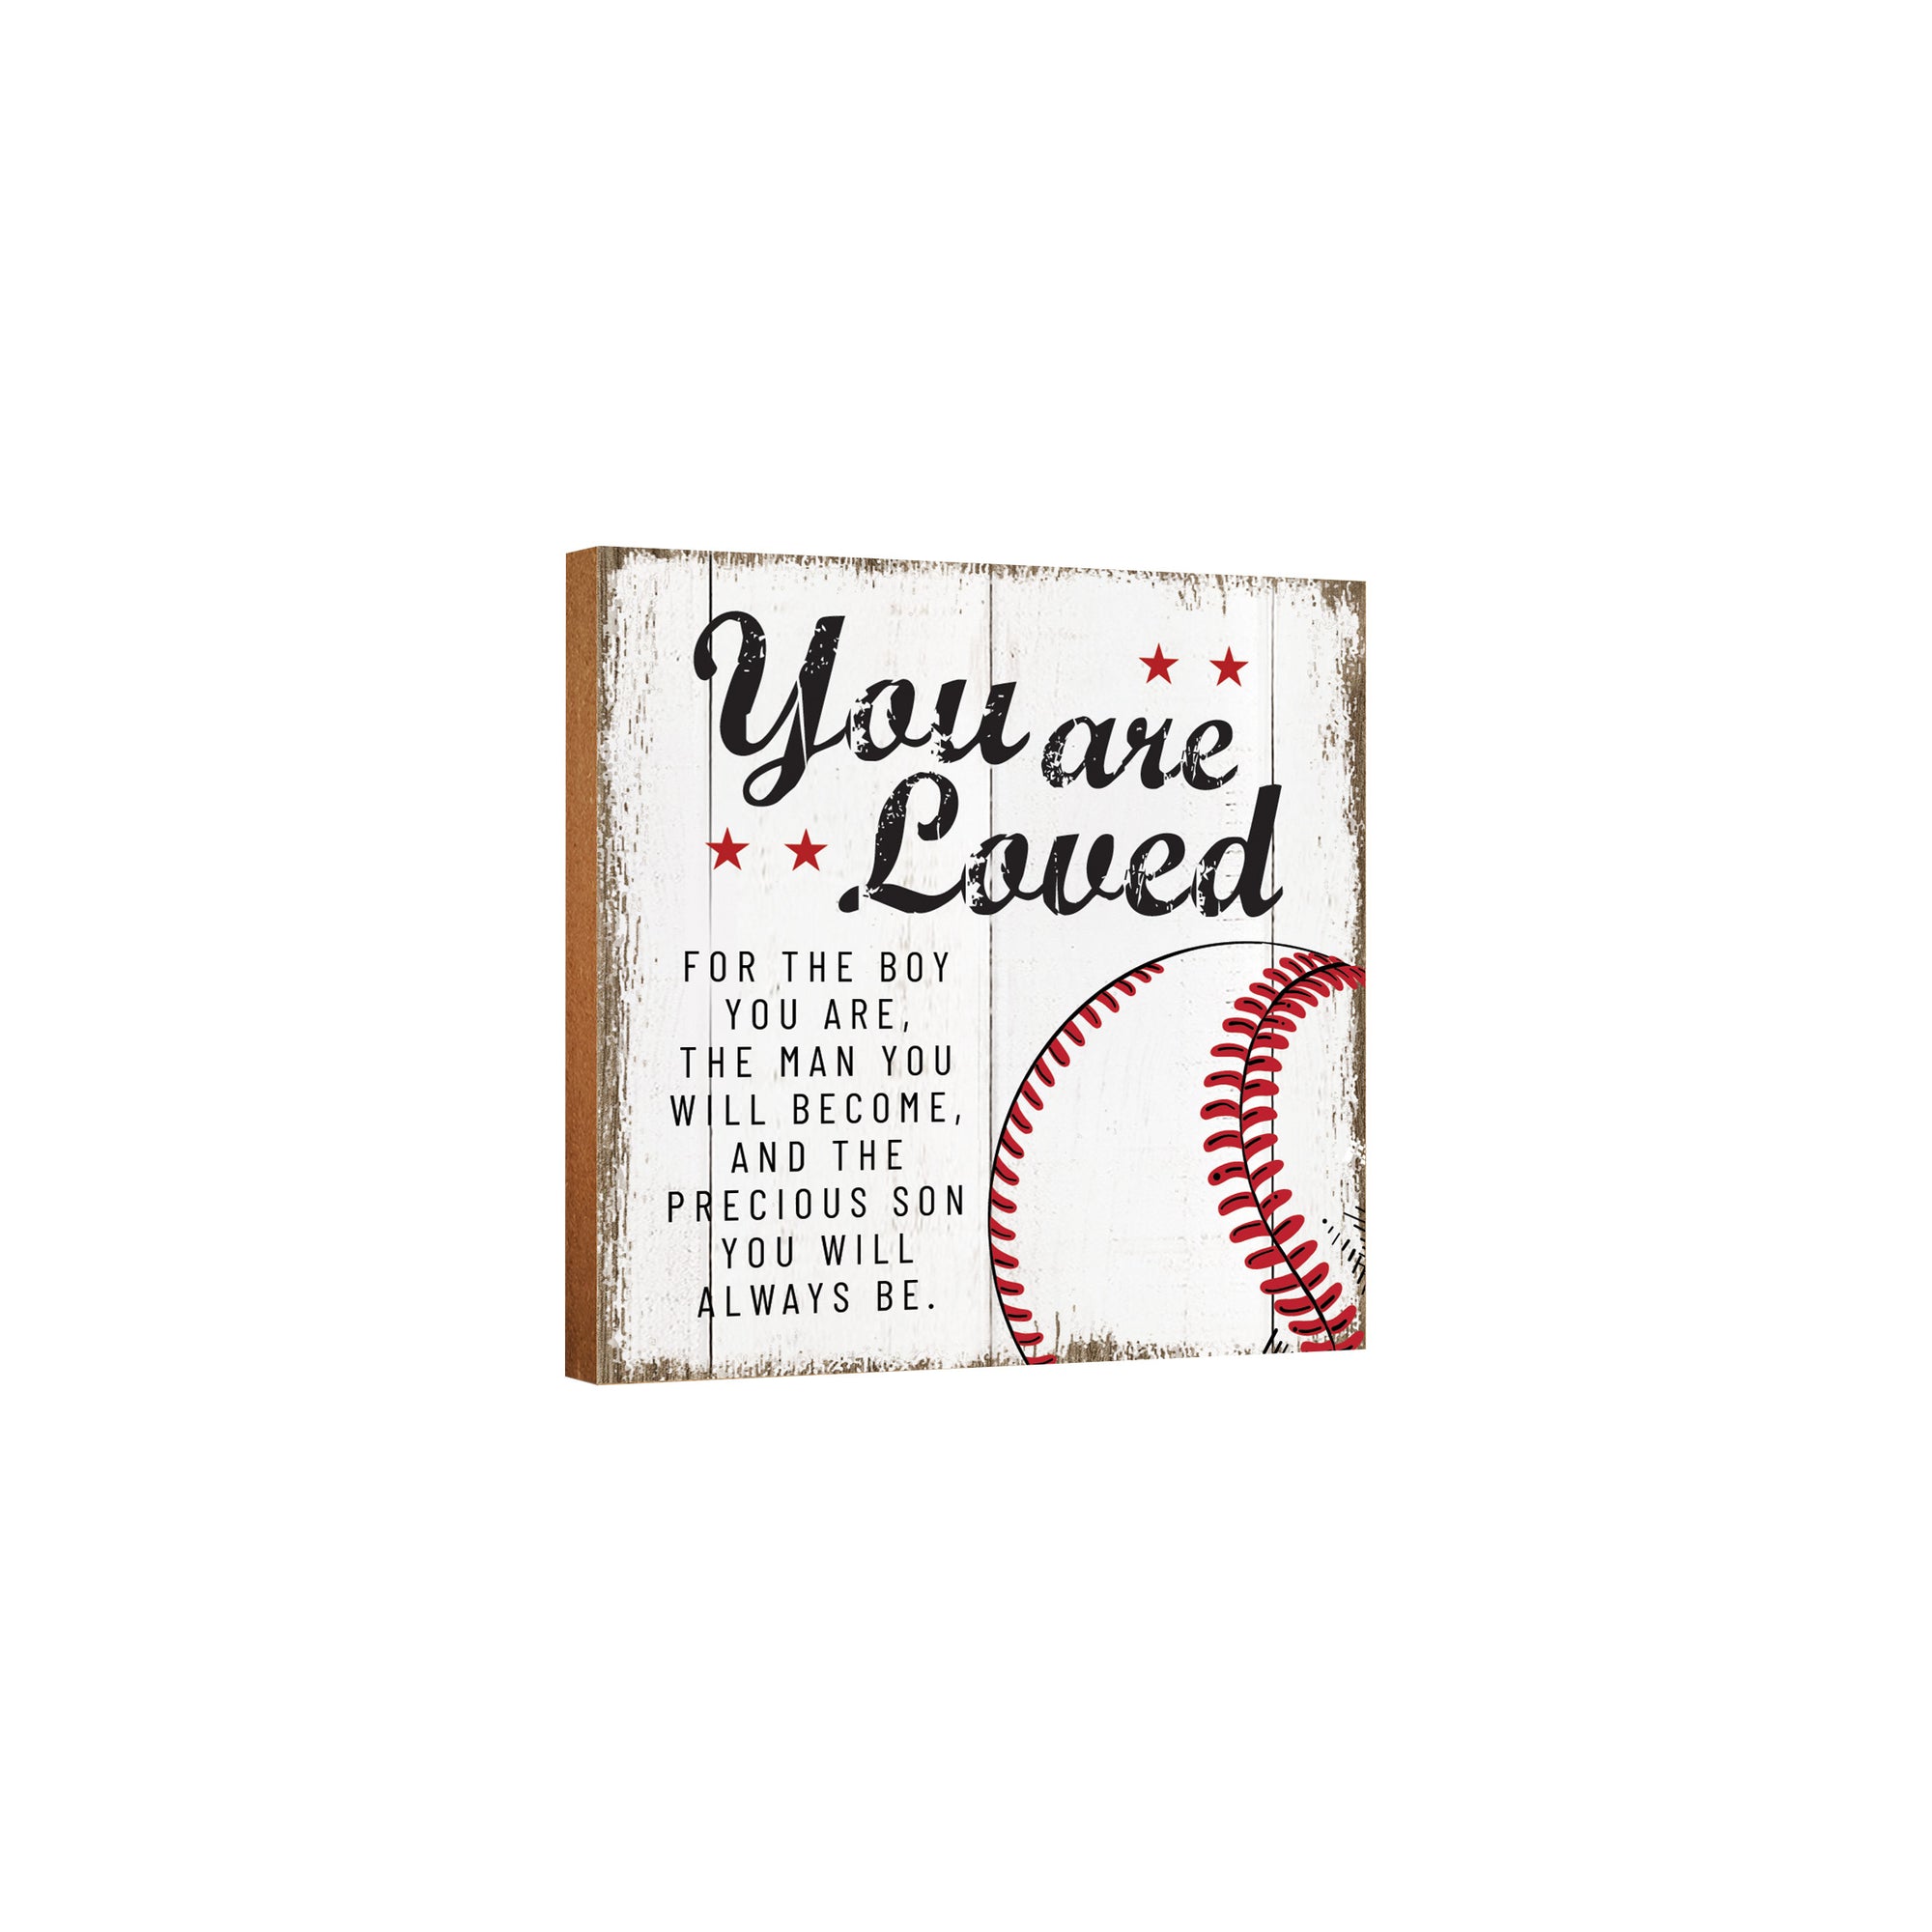 Rustic Wooden Baseball Shadow Box Shelf Décor With Inspiring Bible Verses - You Are Loved